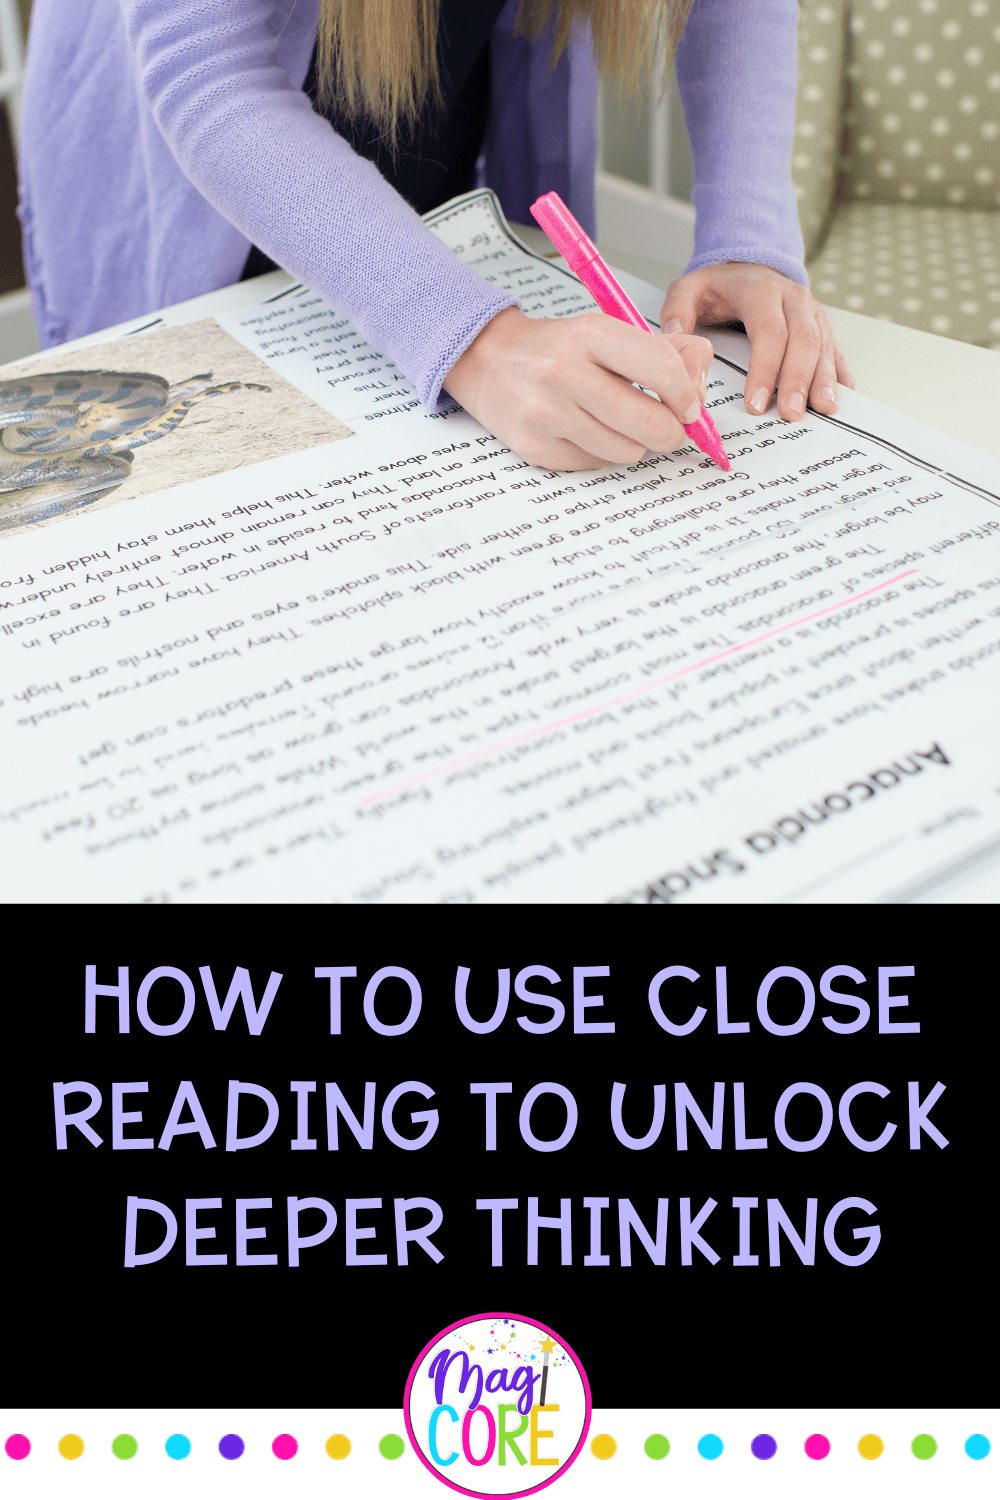 How ot Use Close REading to Unlock Deeper Thinking Blog Pin Cover